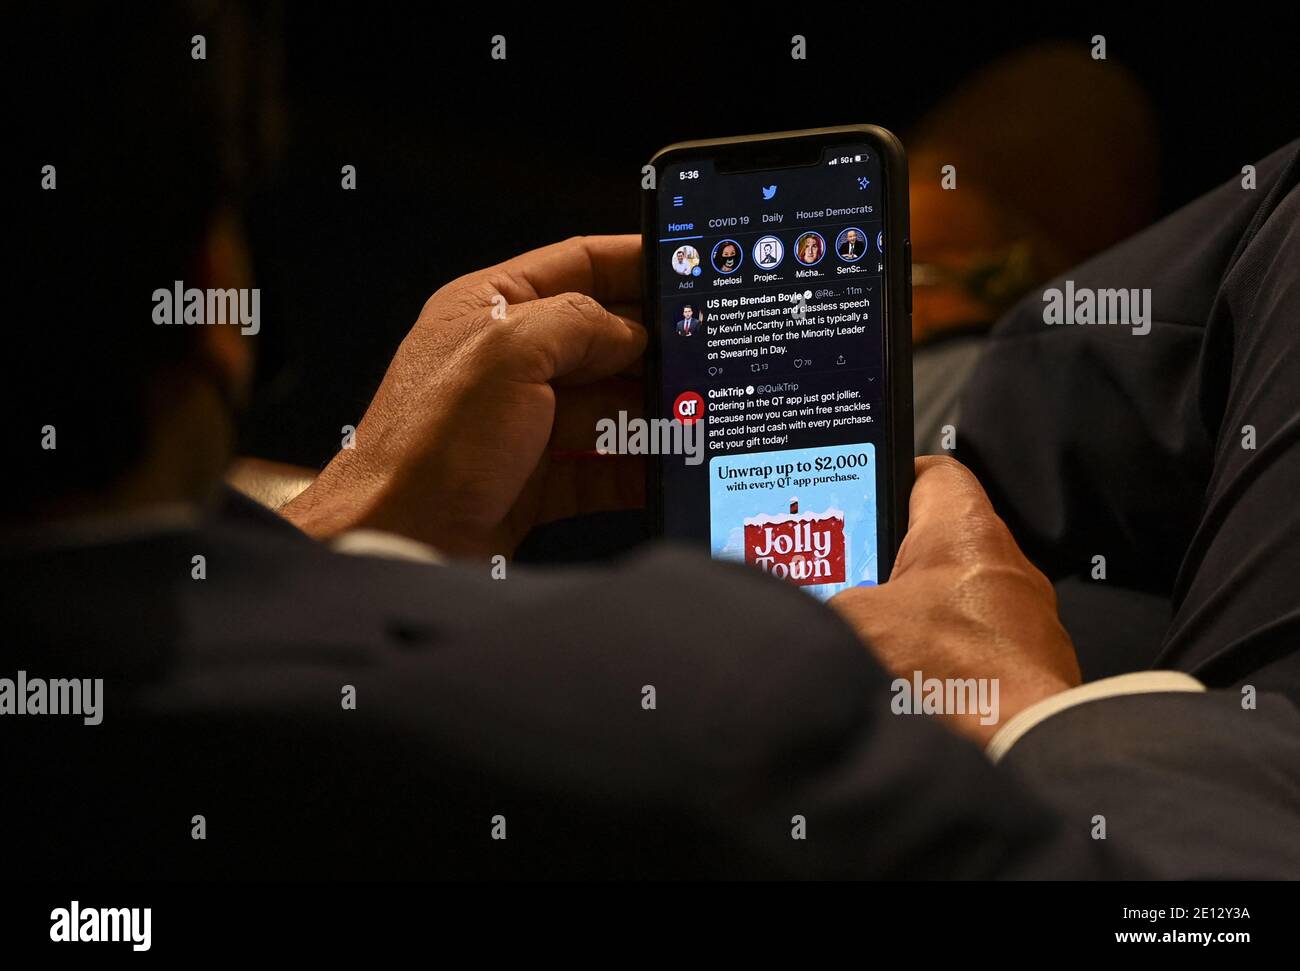 Washington, DC - January 03: A House member checks his phone on the opening day of the 117th Congress at the U.S. Capitol in Washington, DC on January 03, 2021. Photo by Bill O'Leary/Pool/ABACAPRESS.COM Stock Photo